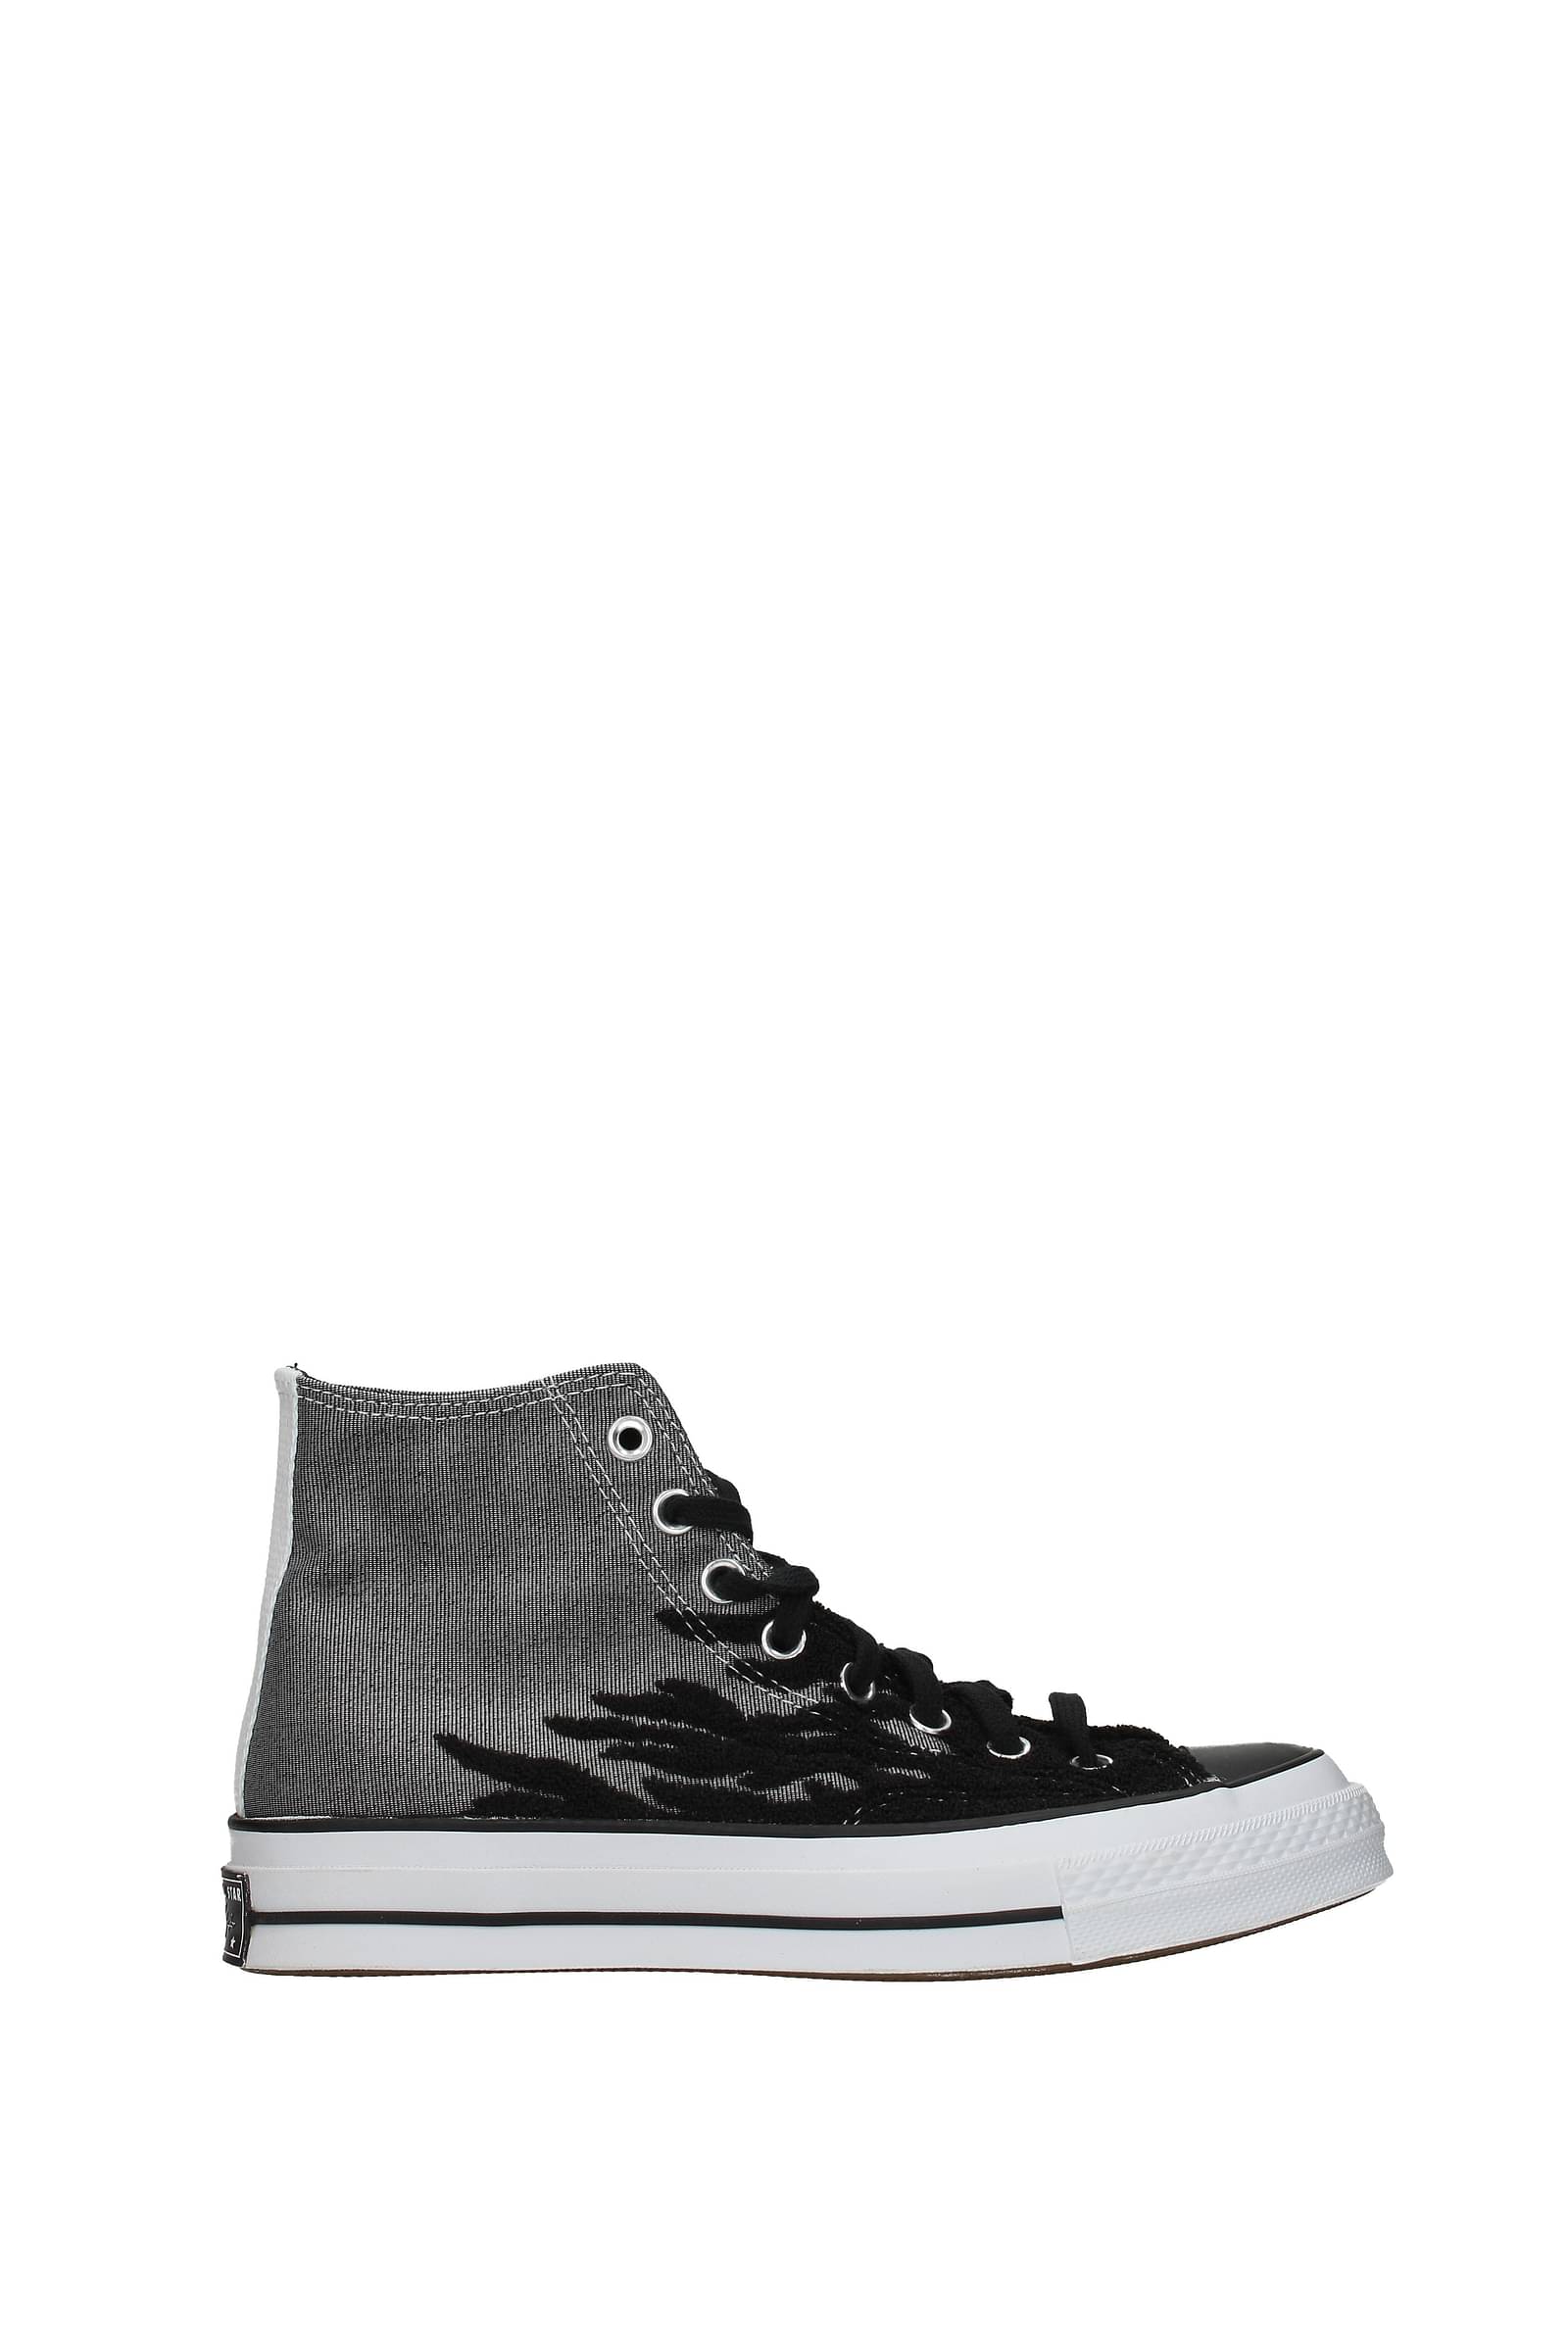 Converse ALL STAR CHUCK TAYLOR Padded High-Top Sneakers men - Glamood Outlet